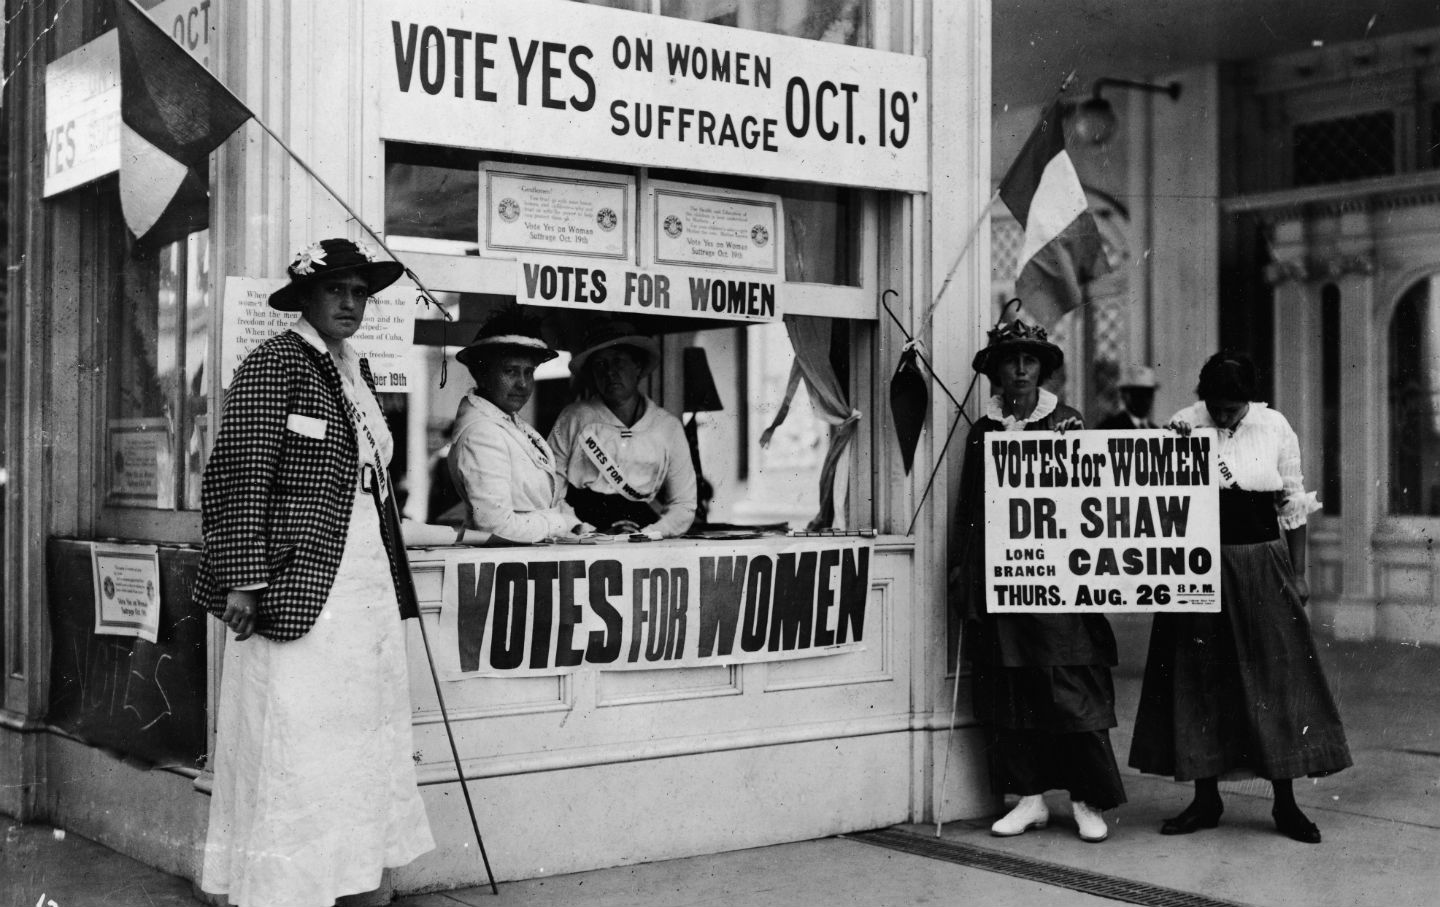 august-26-1920-the-19th-amendment-goes-into-effect-granting-women-the-vote-the-nation